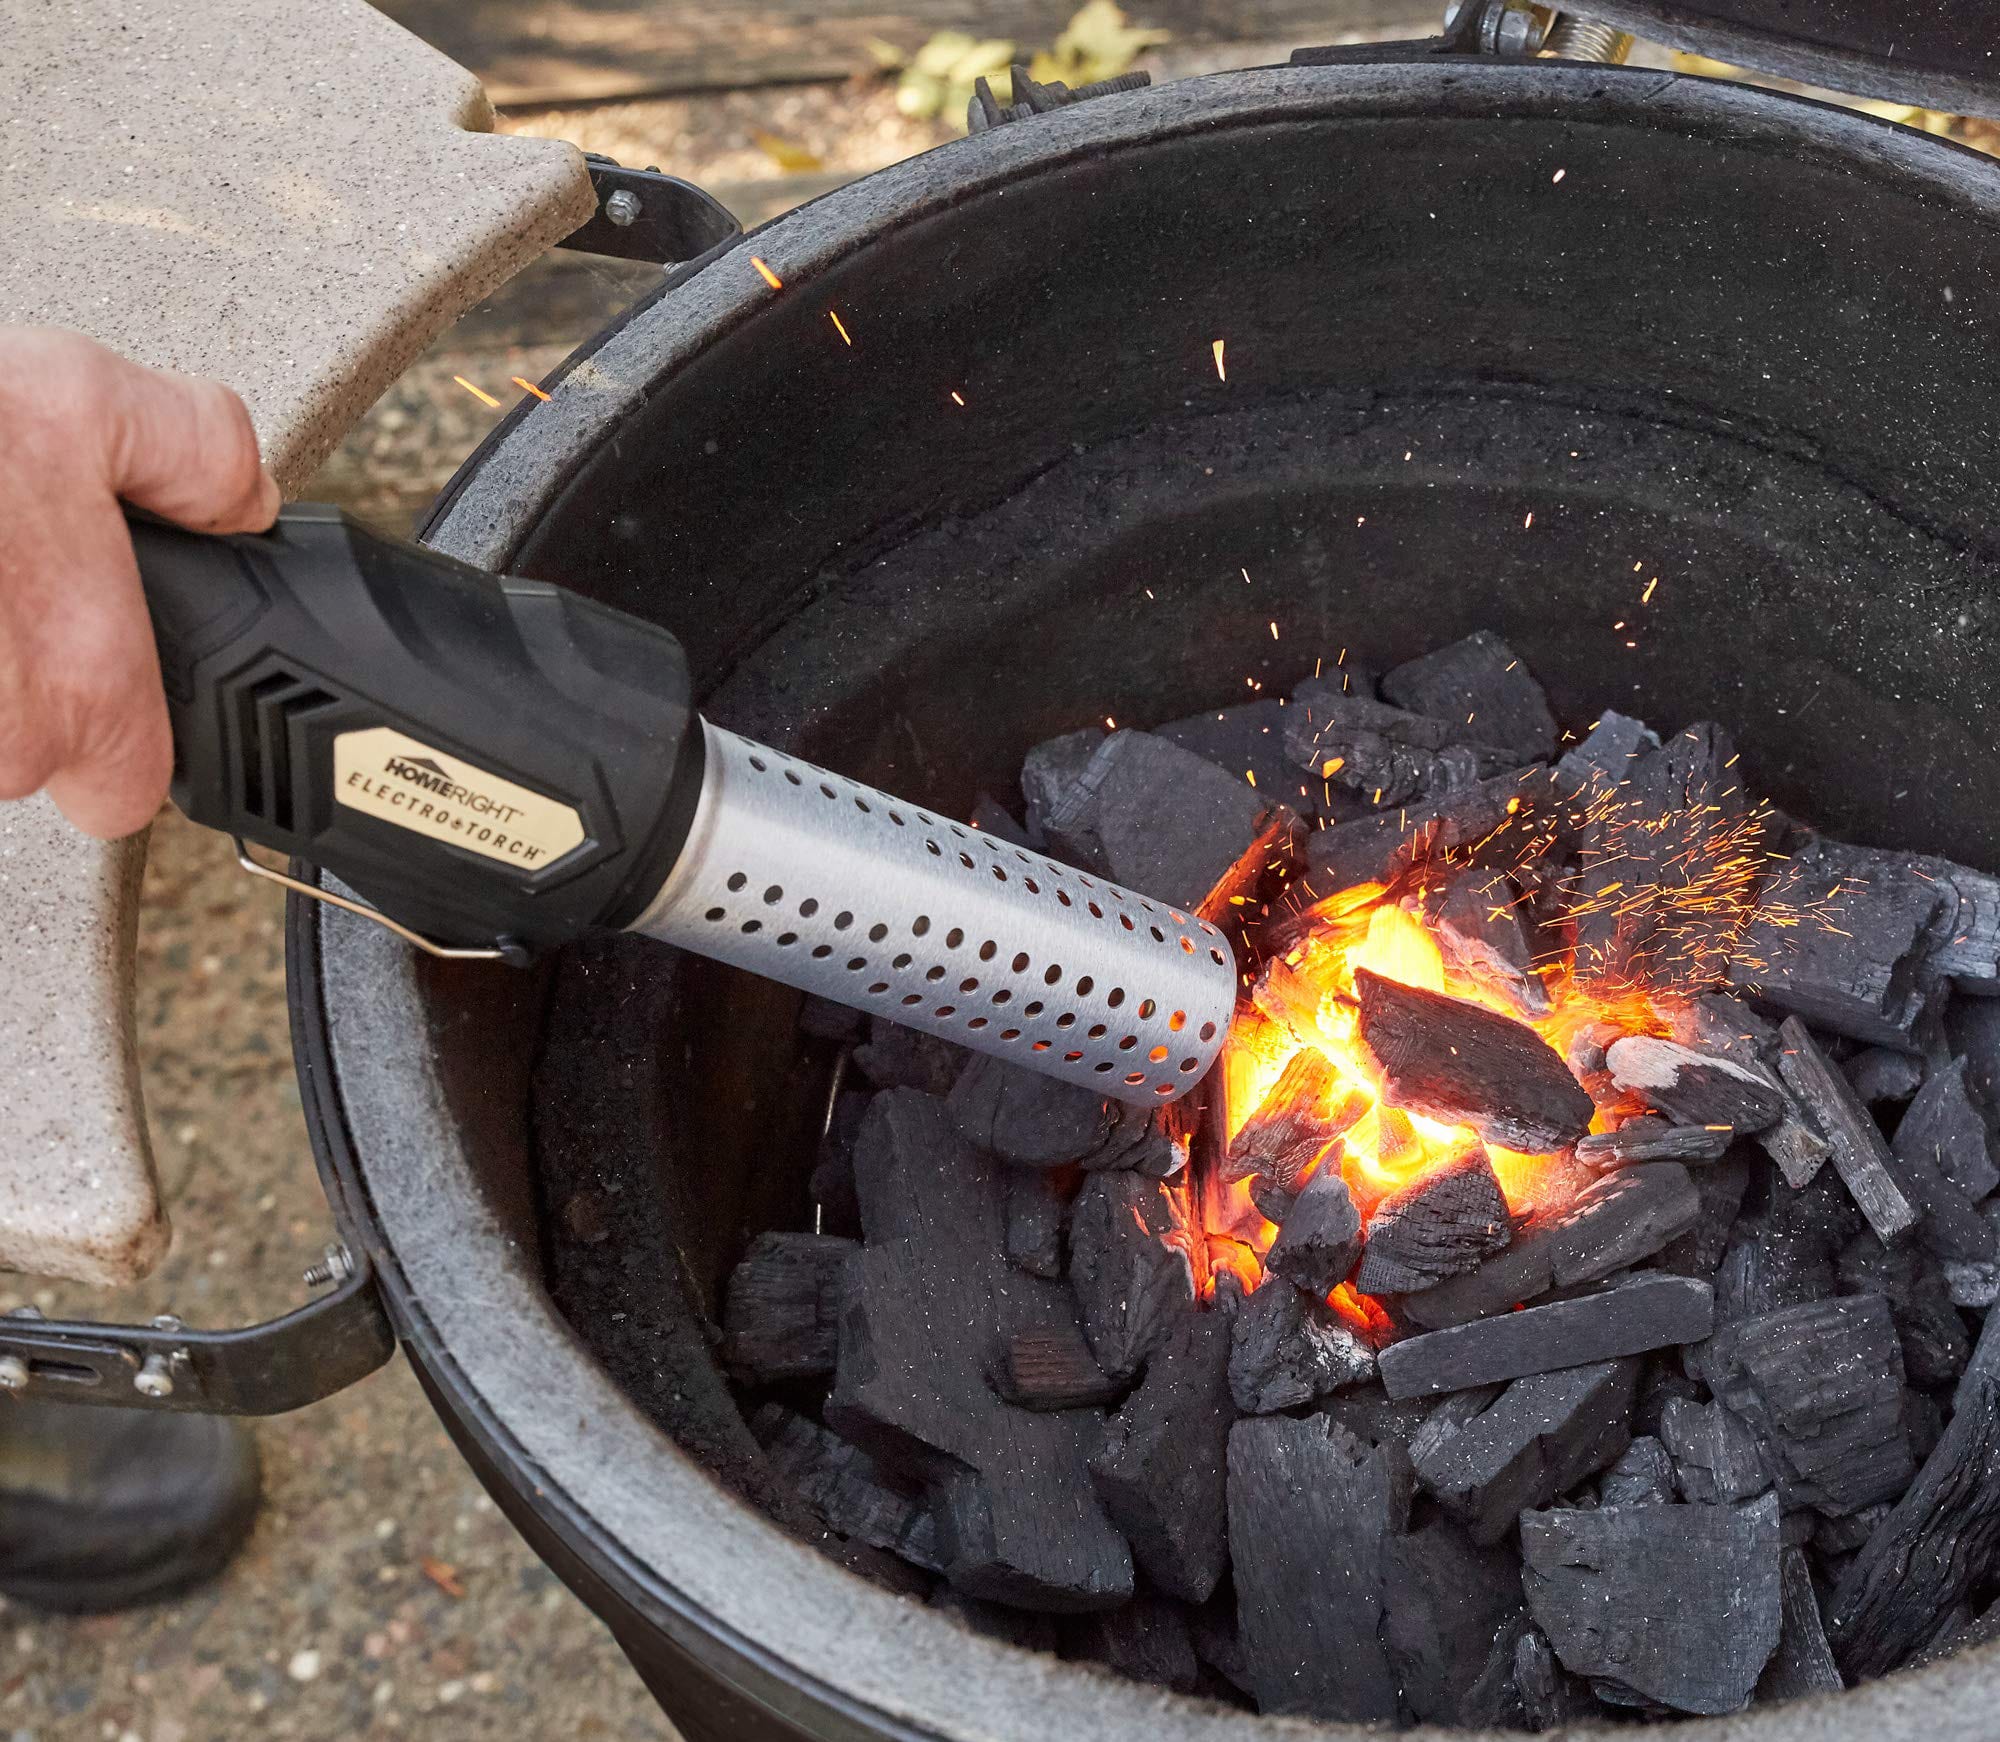 5 Best Electric Charcoal Starters Reviewed in Detail (Spring 2022)